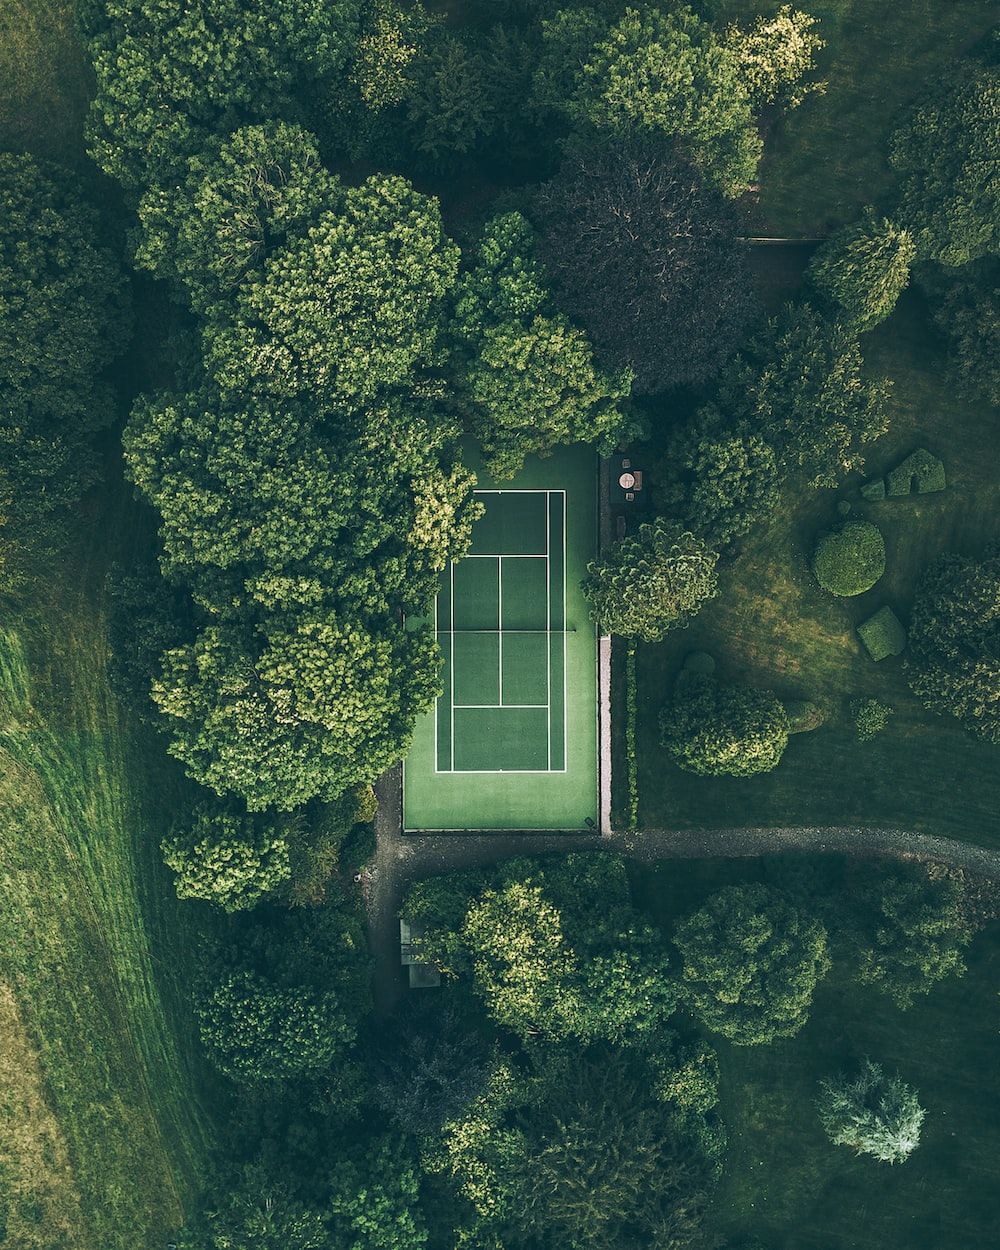 Tennis Court Picture. Download Free Image